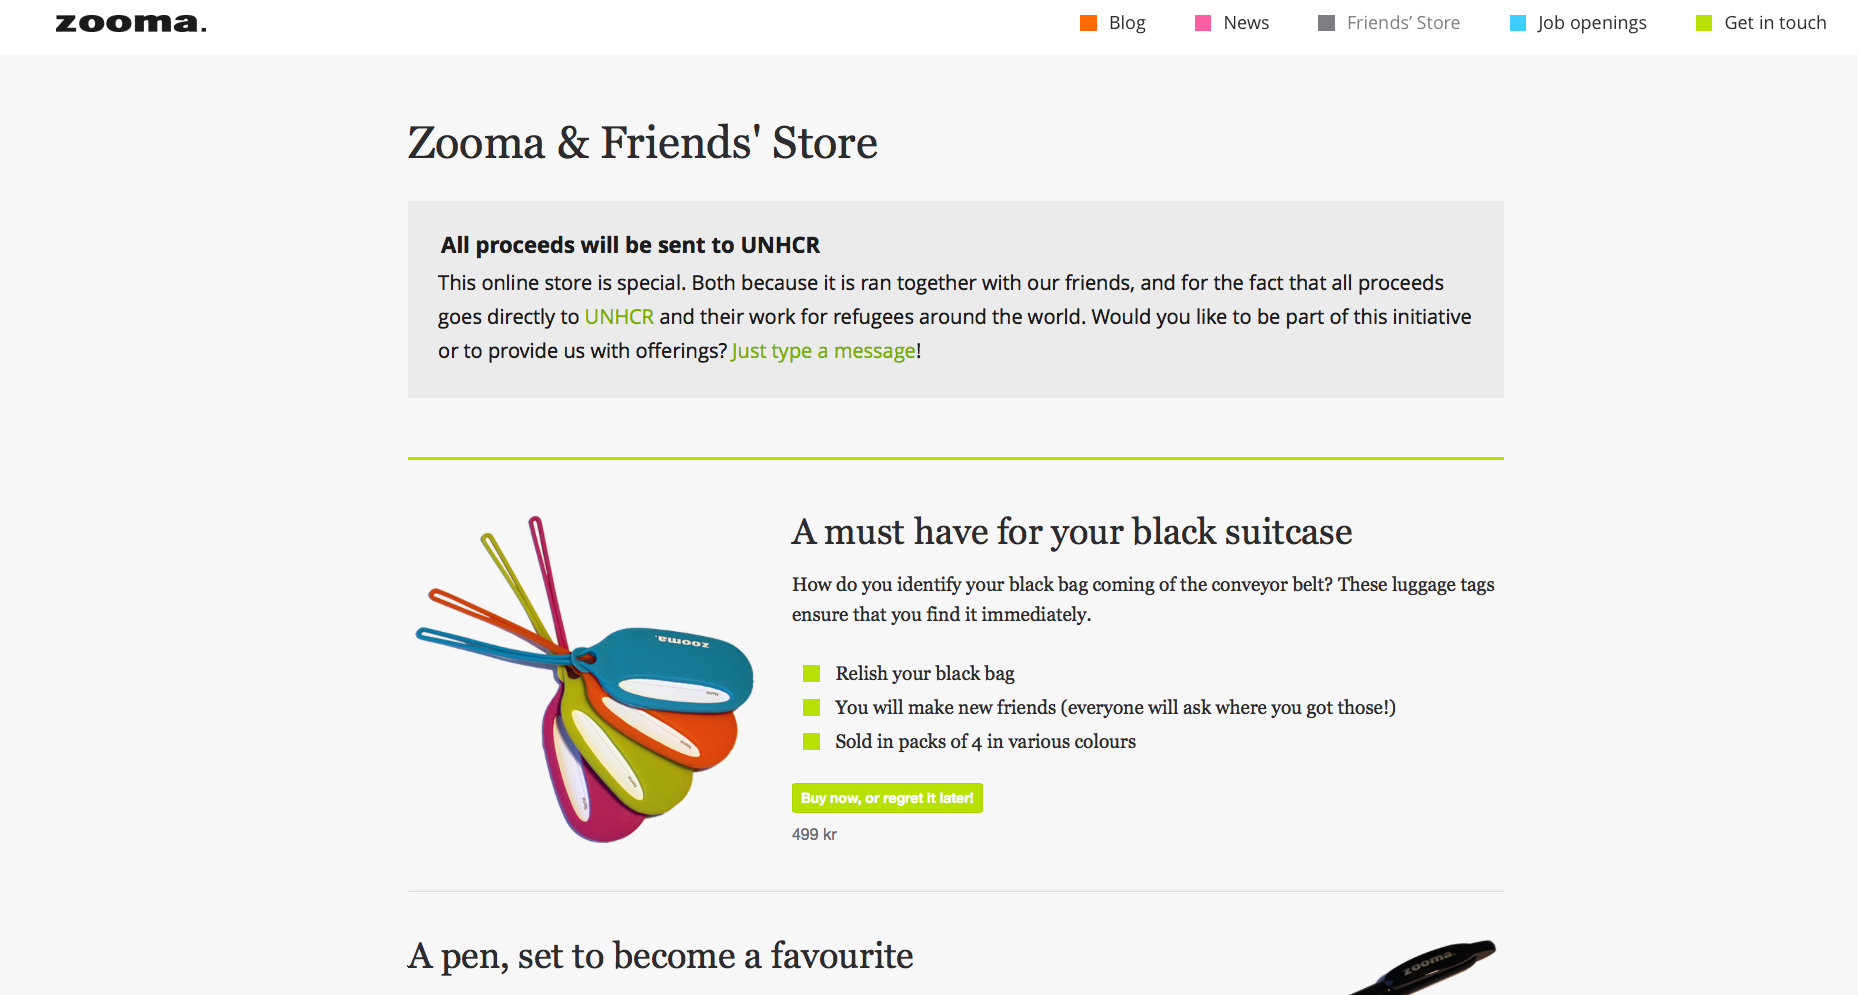 Zooma & Friends Store launched